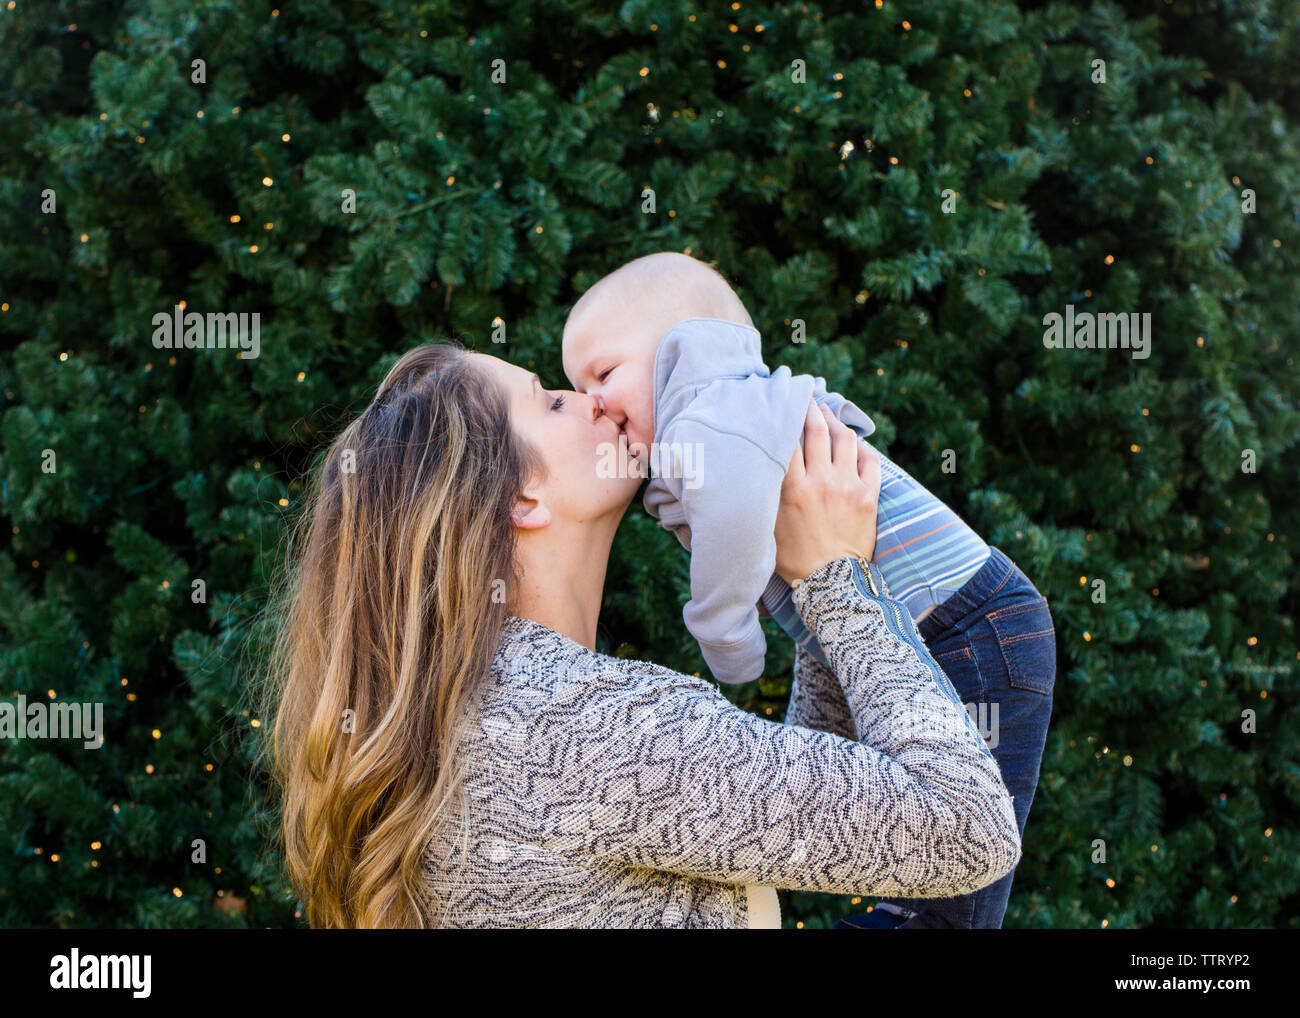 A mother lifts her baby boy up for a kiss Stock Photo